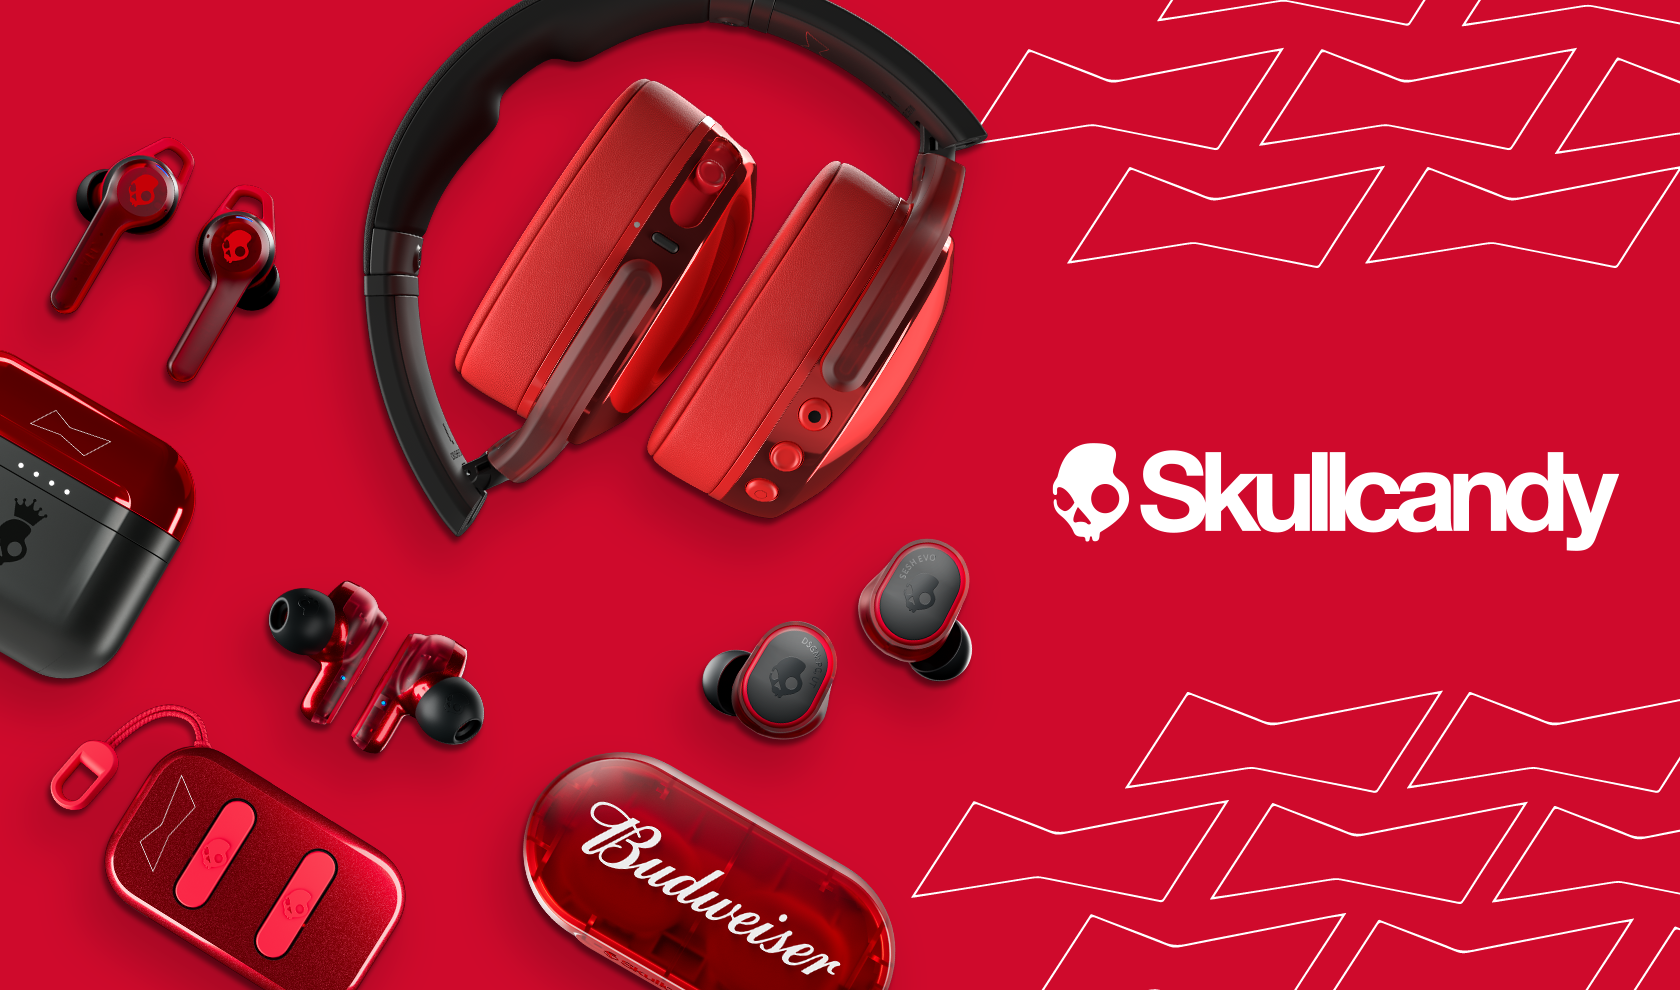 Skullcandy Unveils Its New Collaboration With Budweiser